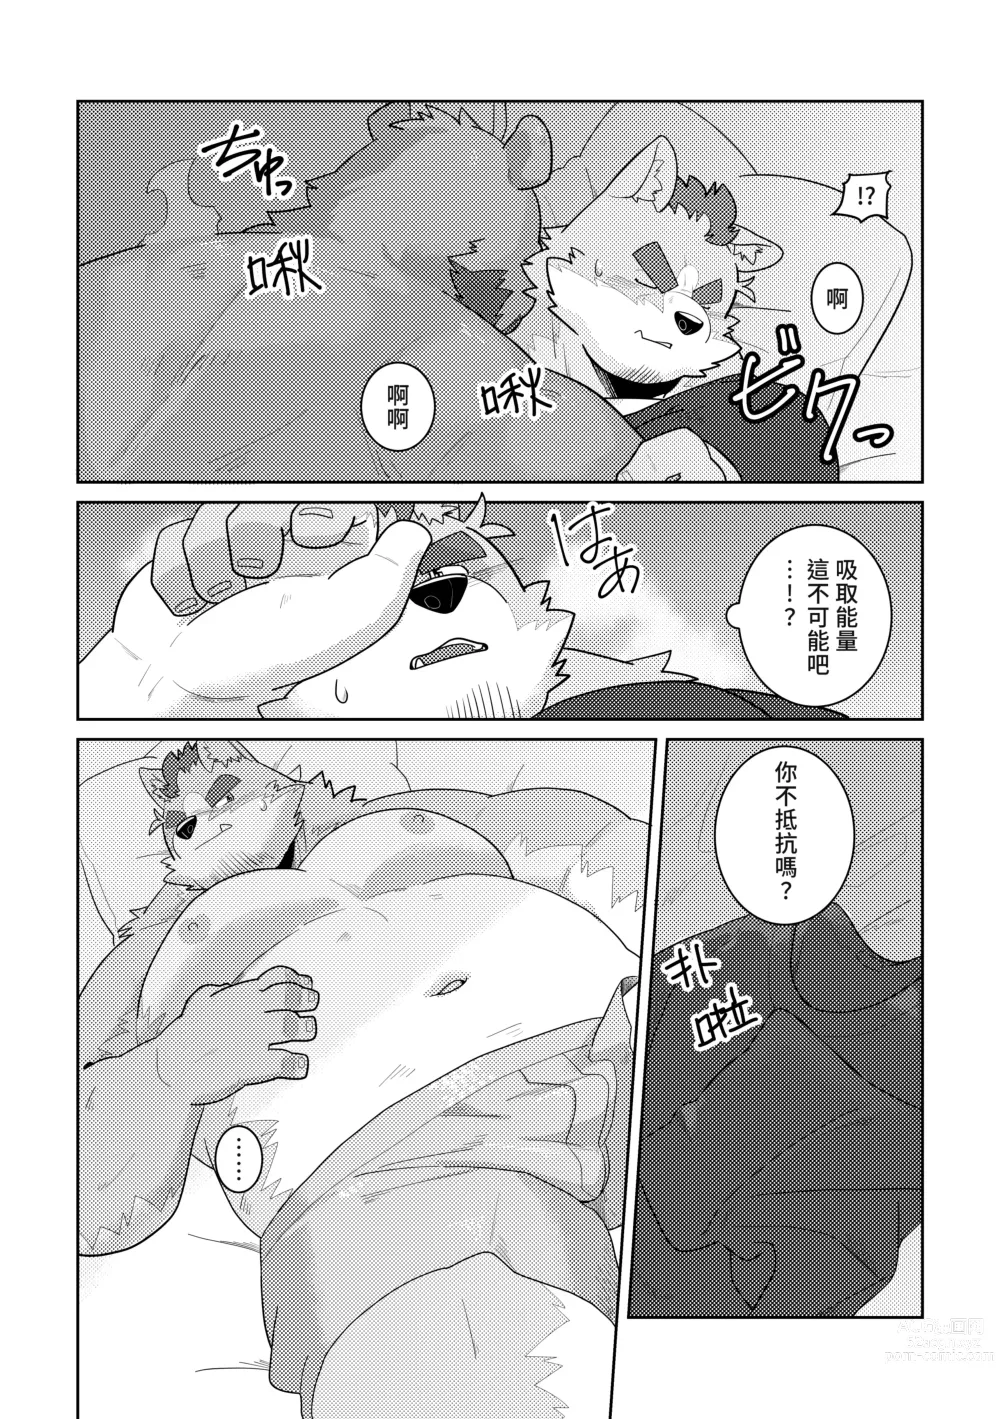 Page 13 of doujinshi 幽靈戀人